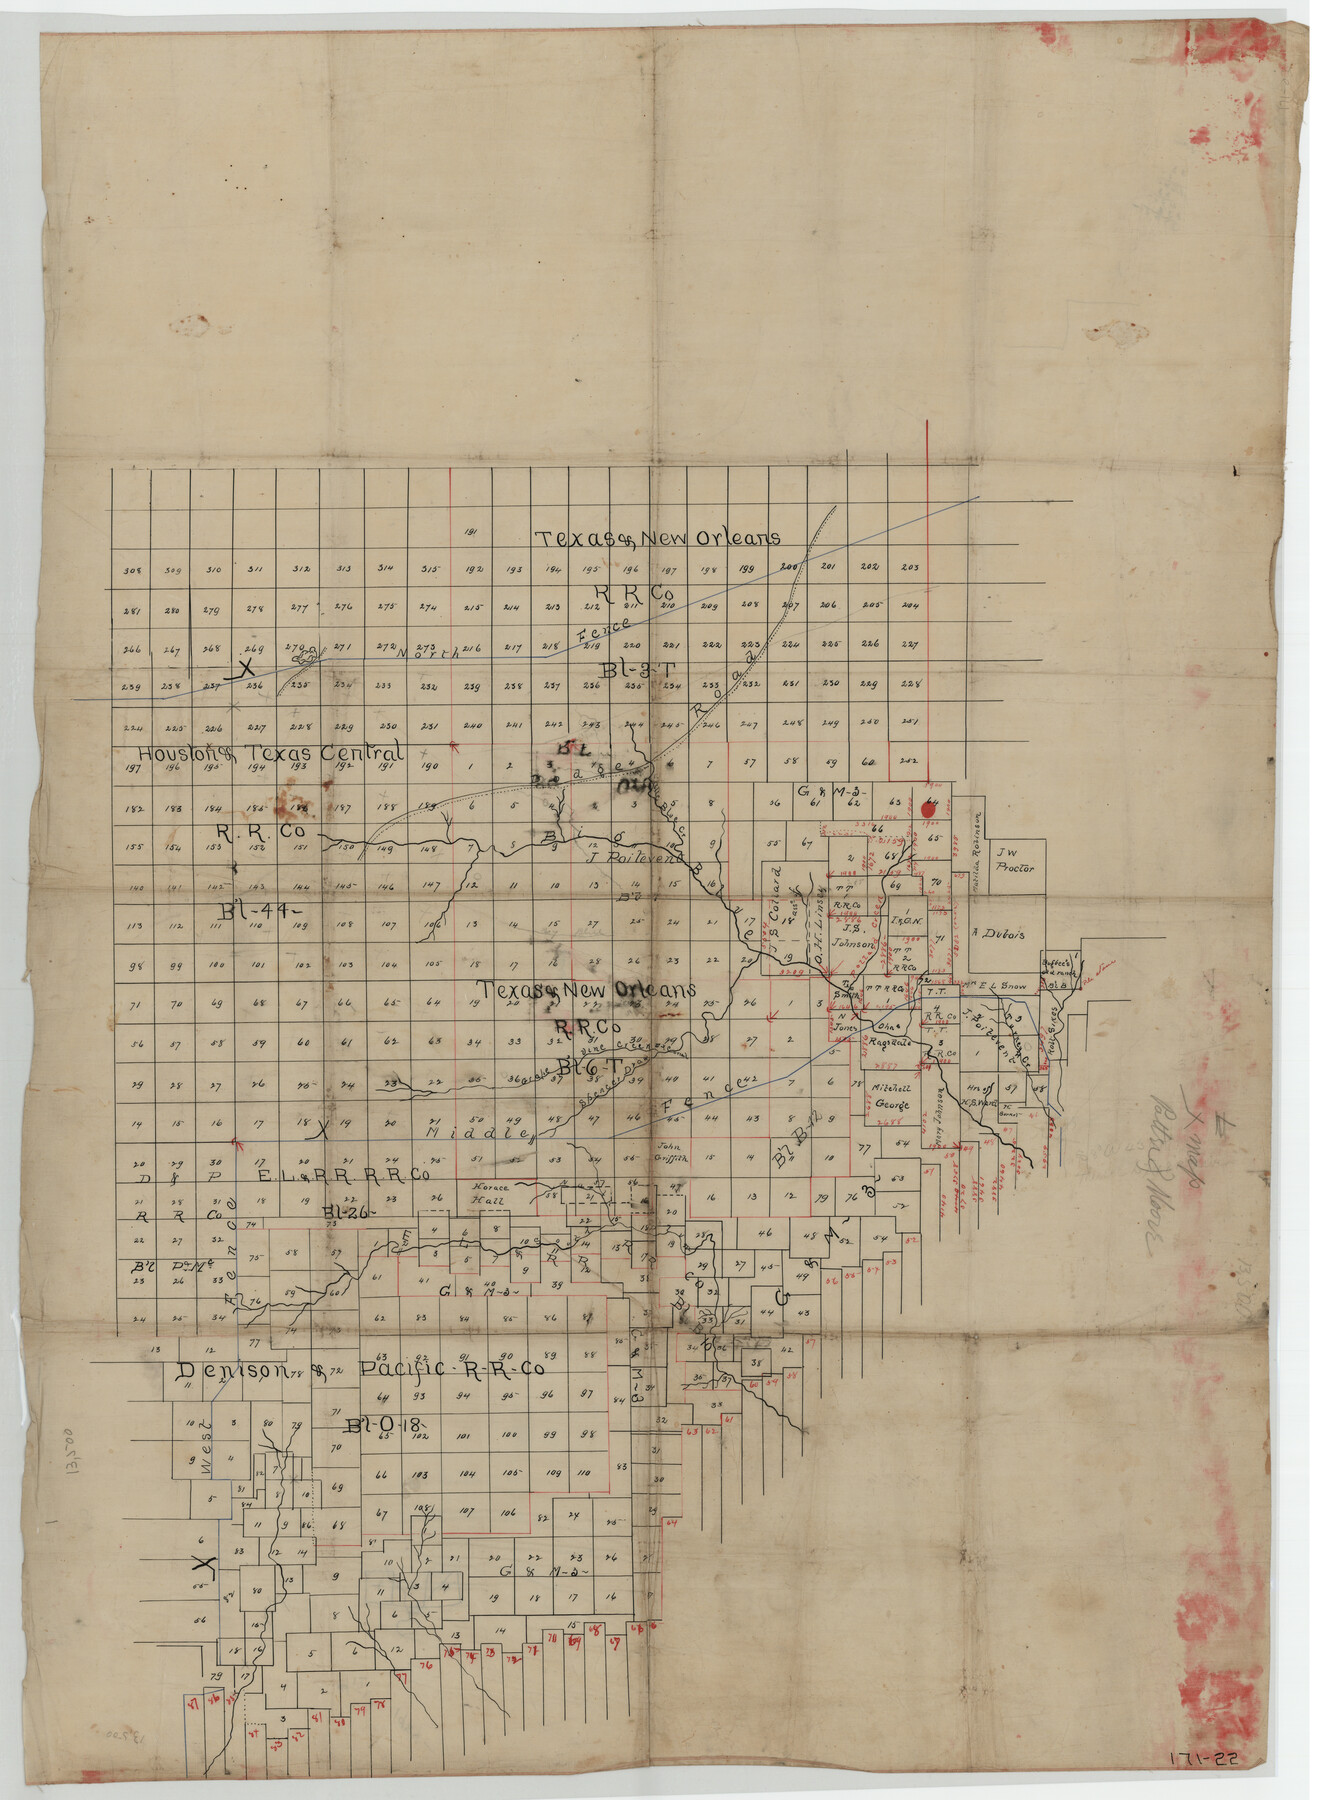 93001, [Sketch showing T. & N. O. Blocks 3T and 6T, Denison and Pacific RR. Co. Block O-18 and surrounding areas], Twichell Survey Records